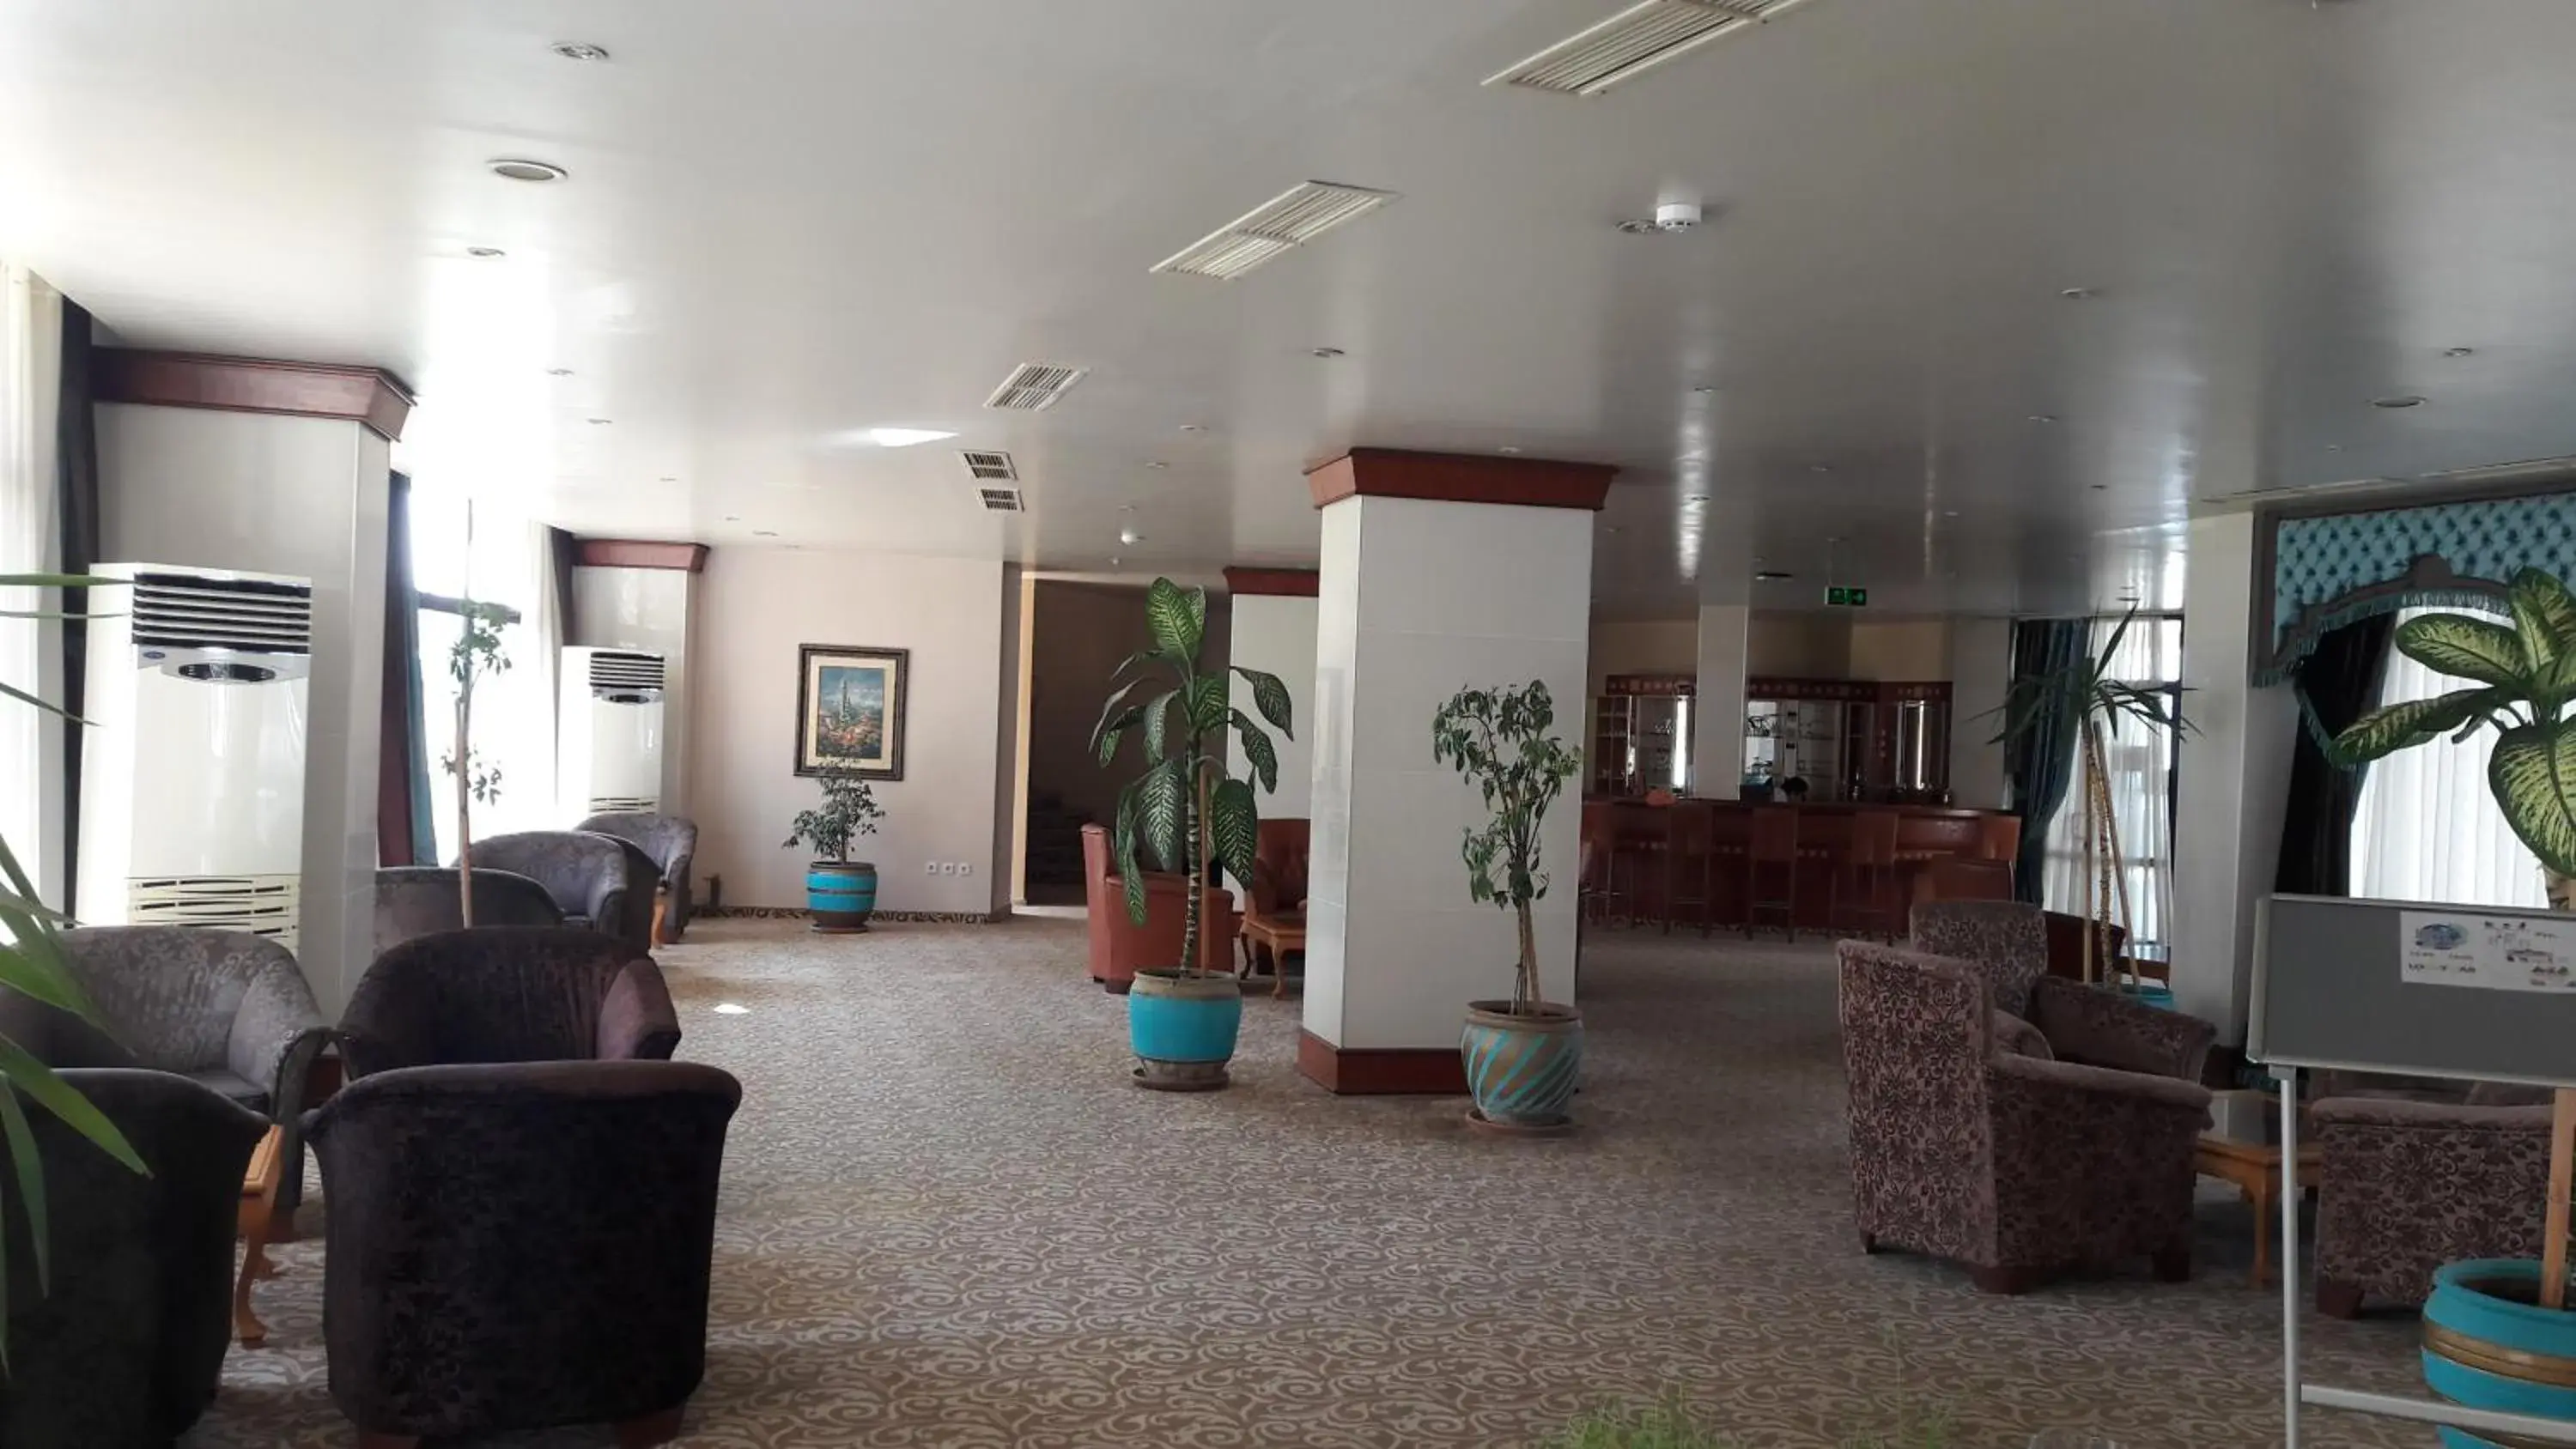 Lounge or bar, Lobby/Reception in Cender Hotel